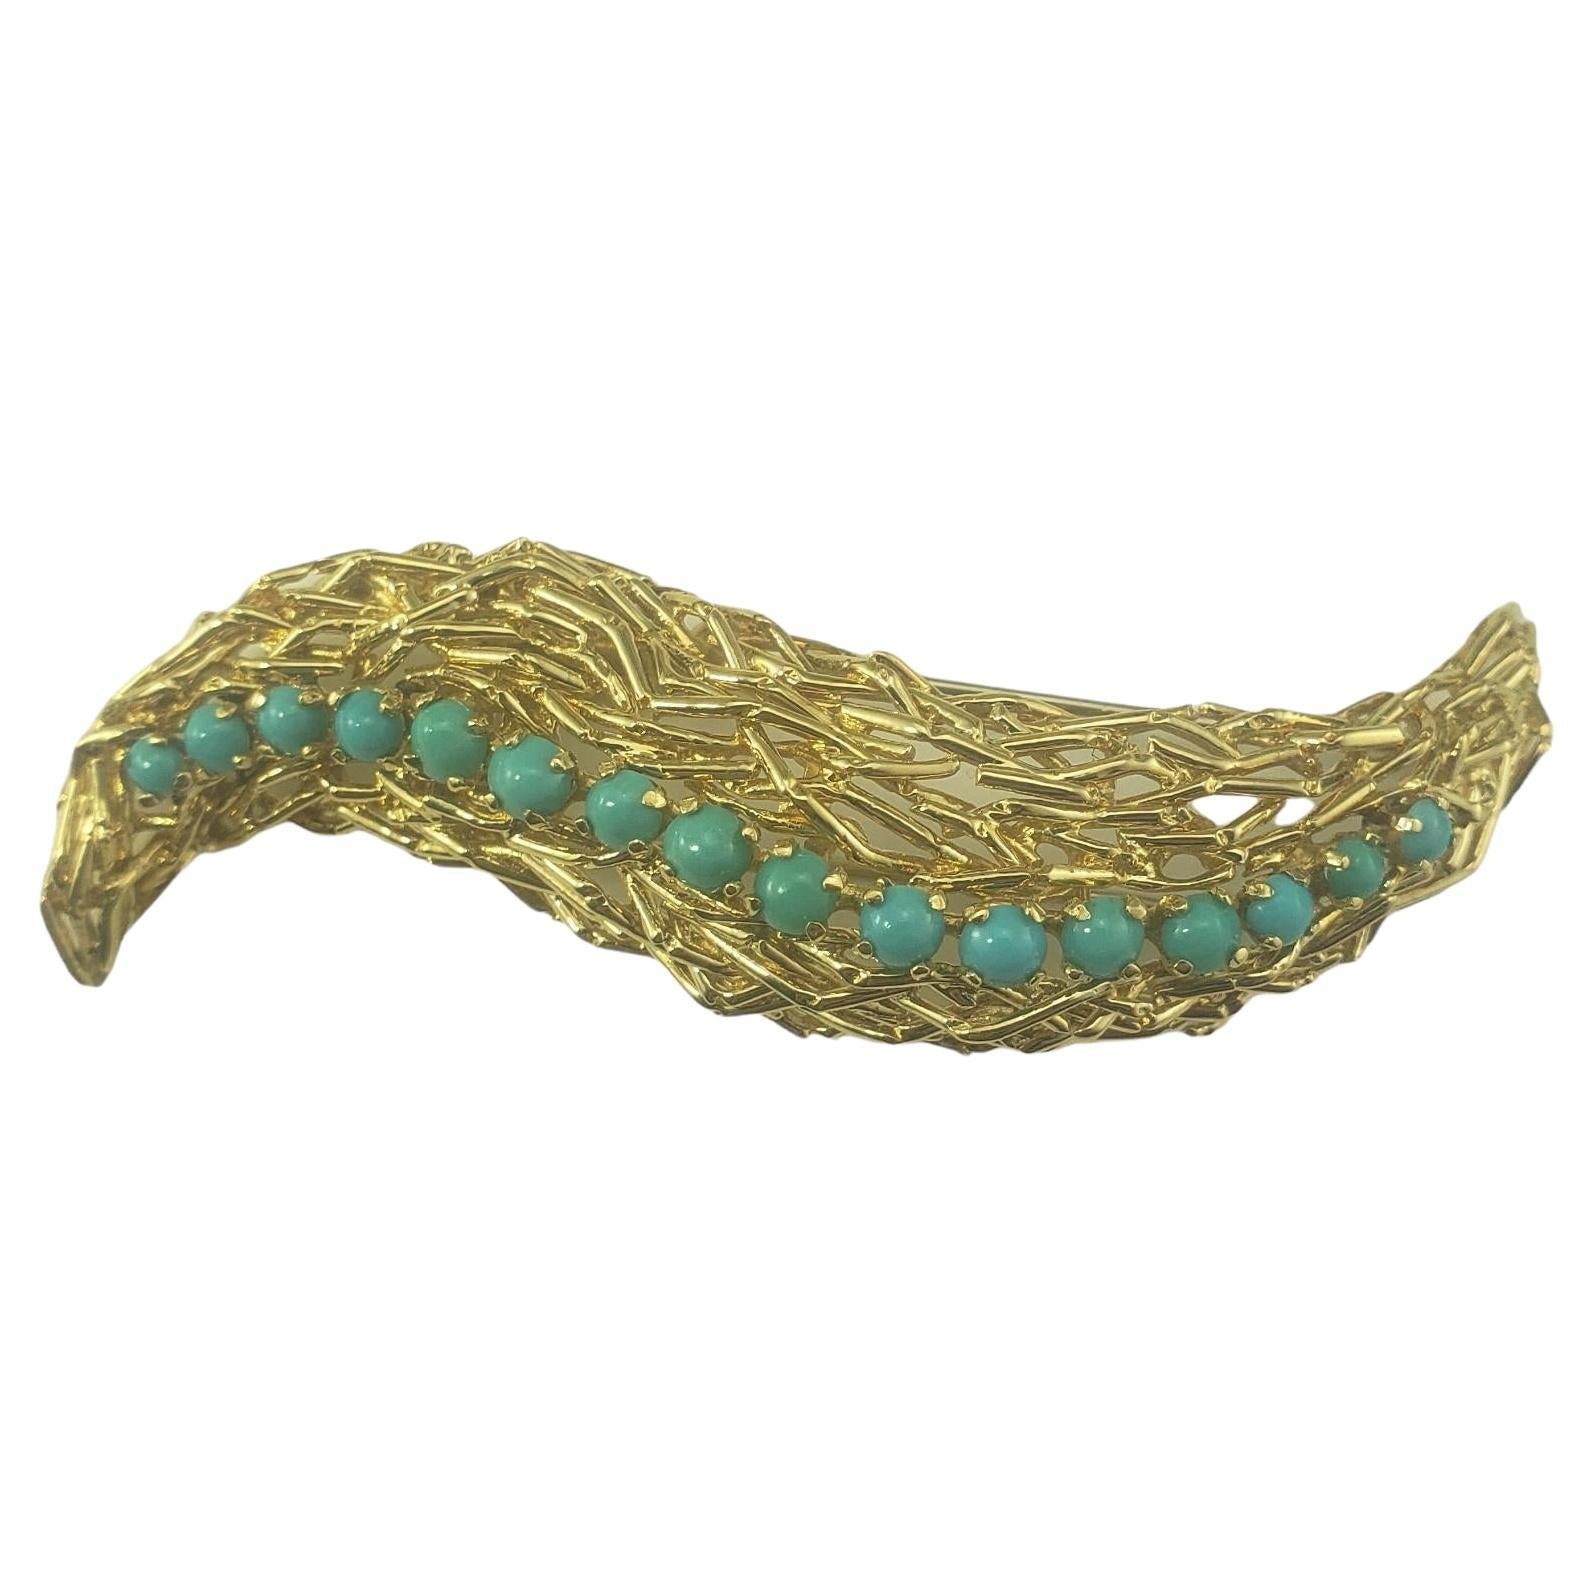 Tiffany & Co. 18 Karat Yellow Gold and Turquoise Brooch/Pin #16802